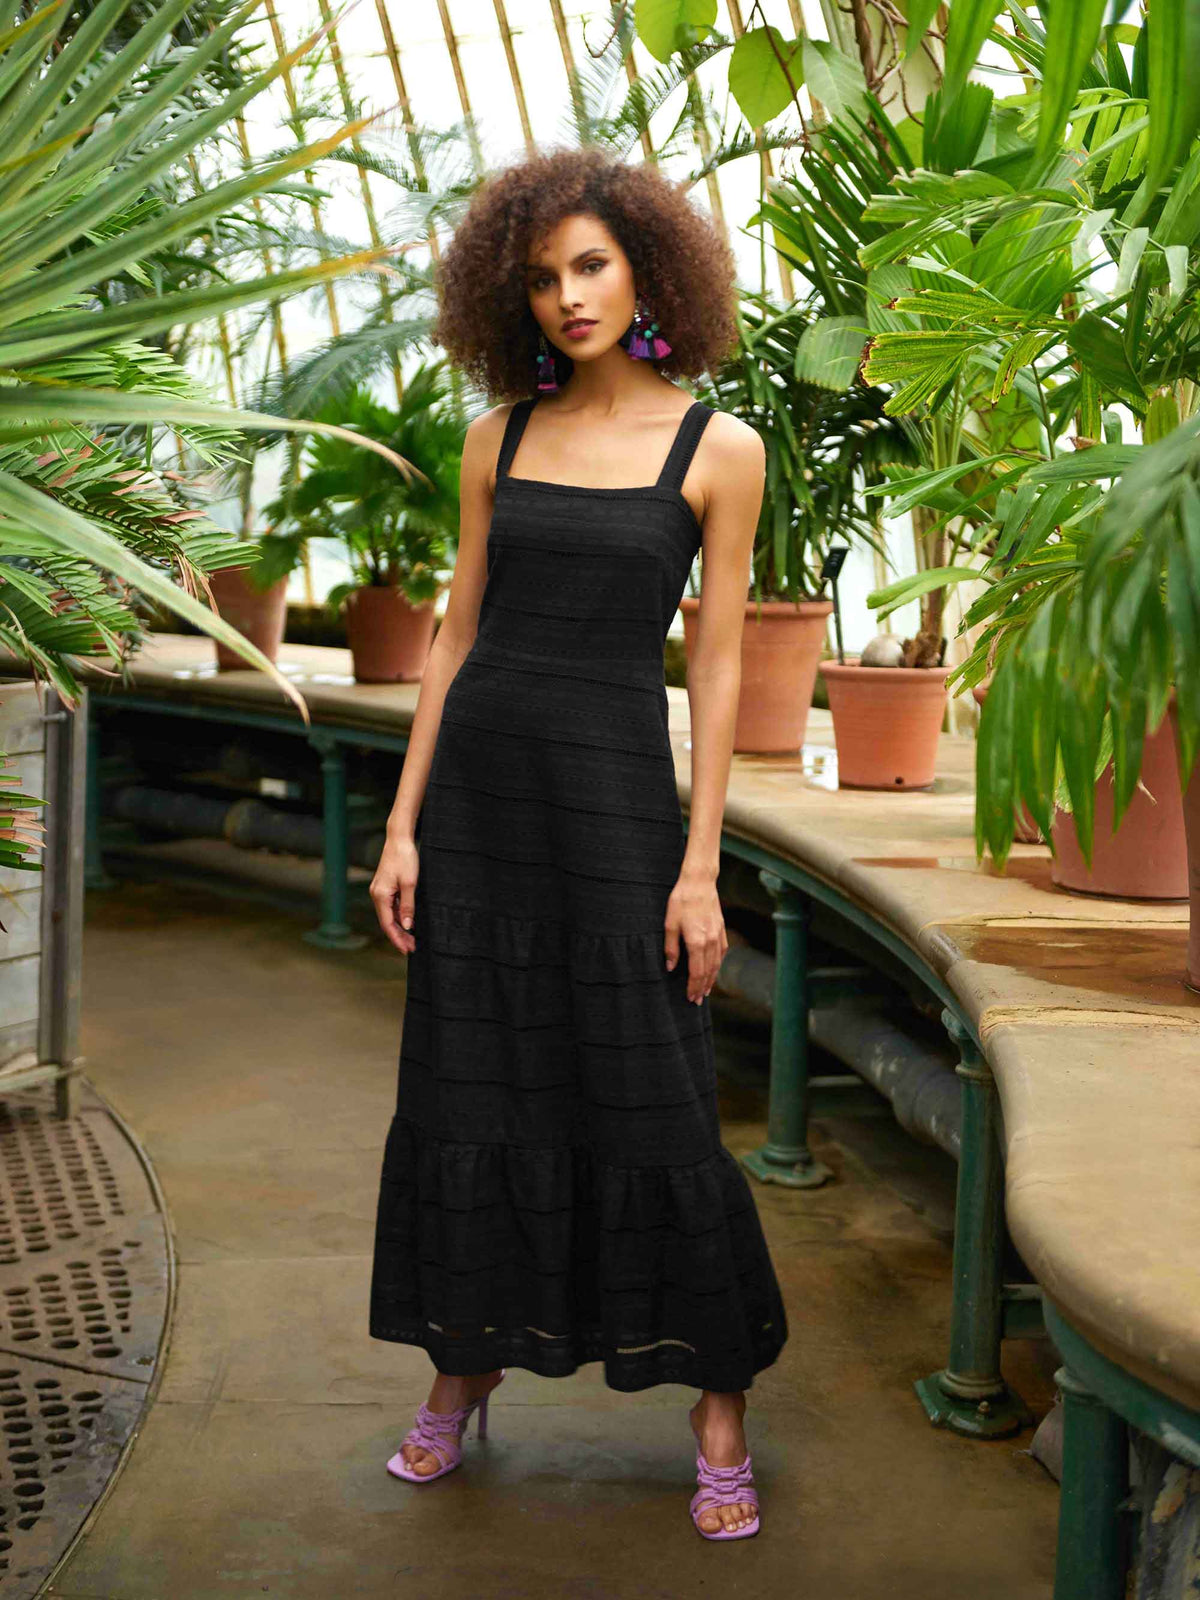 Black Broderie Anglaise Lace Maxi Dress